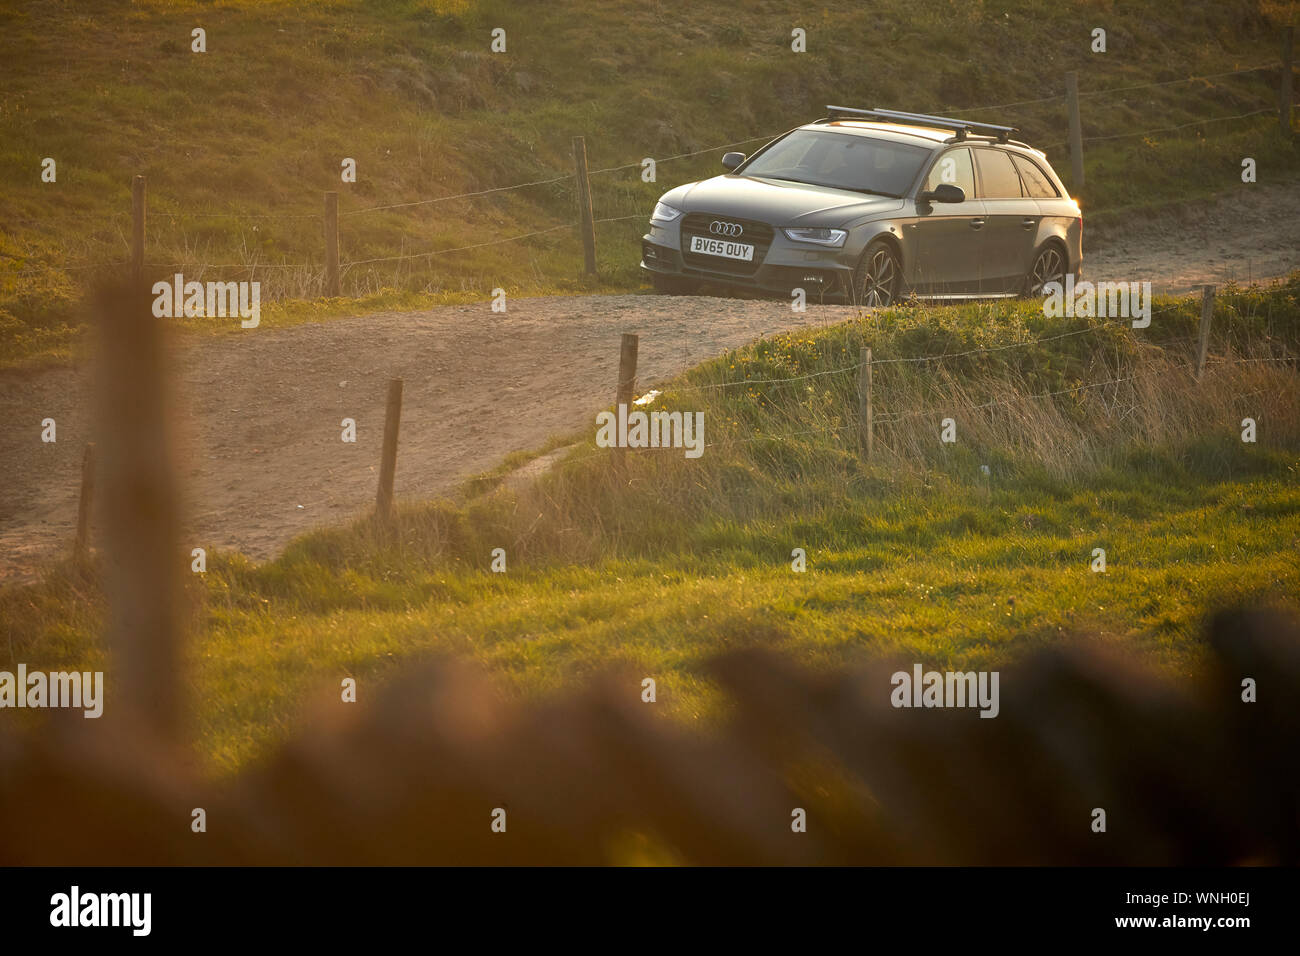 Grey Audi  on a country road dirt track in the countryside on Hartshead pike hill Stock Photo